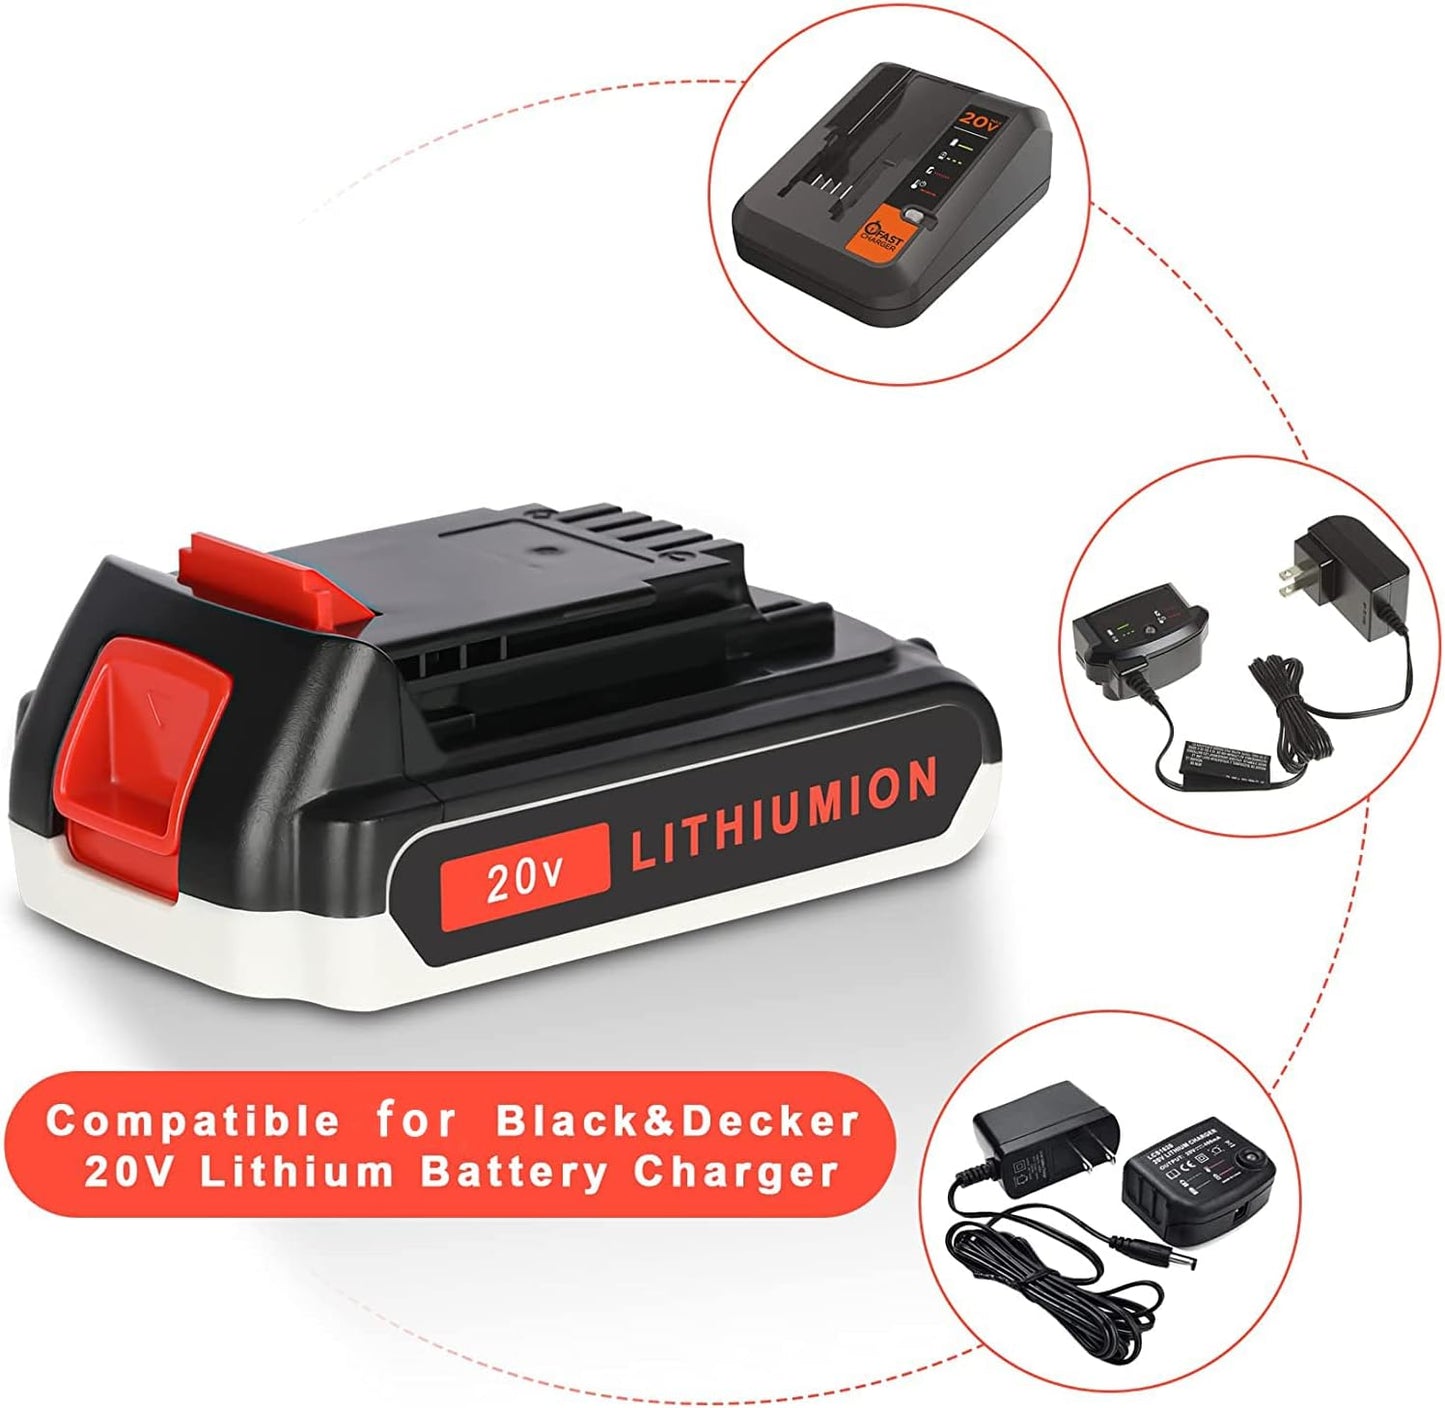 2 Packs JYJZPB 3000mAh Replace 20V Lithium Battery Compatible for Black and Decker LB20 LBXR20 Decker MAX Cordless Tools